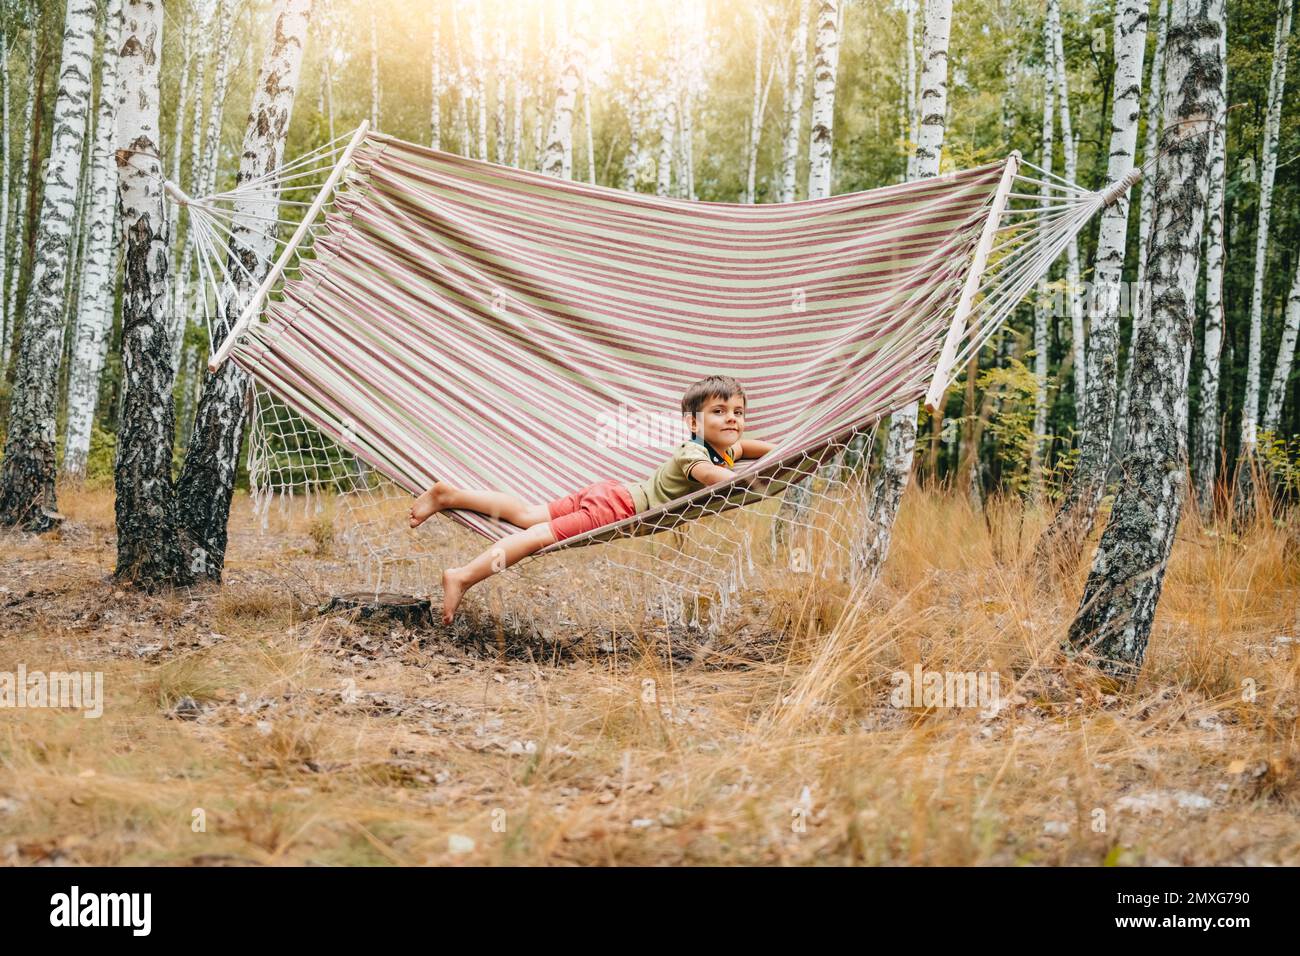 Cute little boy relax on big hammock in birch grove. Child smiling, enjoying nature at summer. Stock Photo